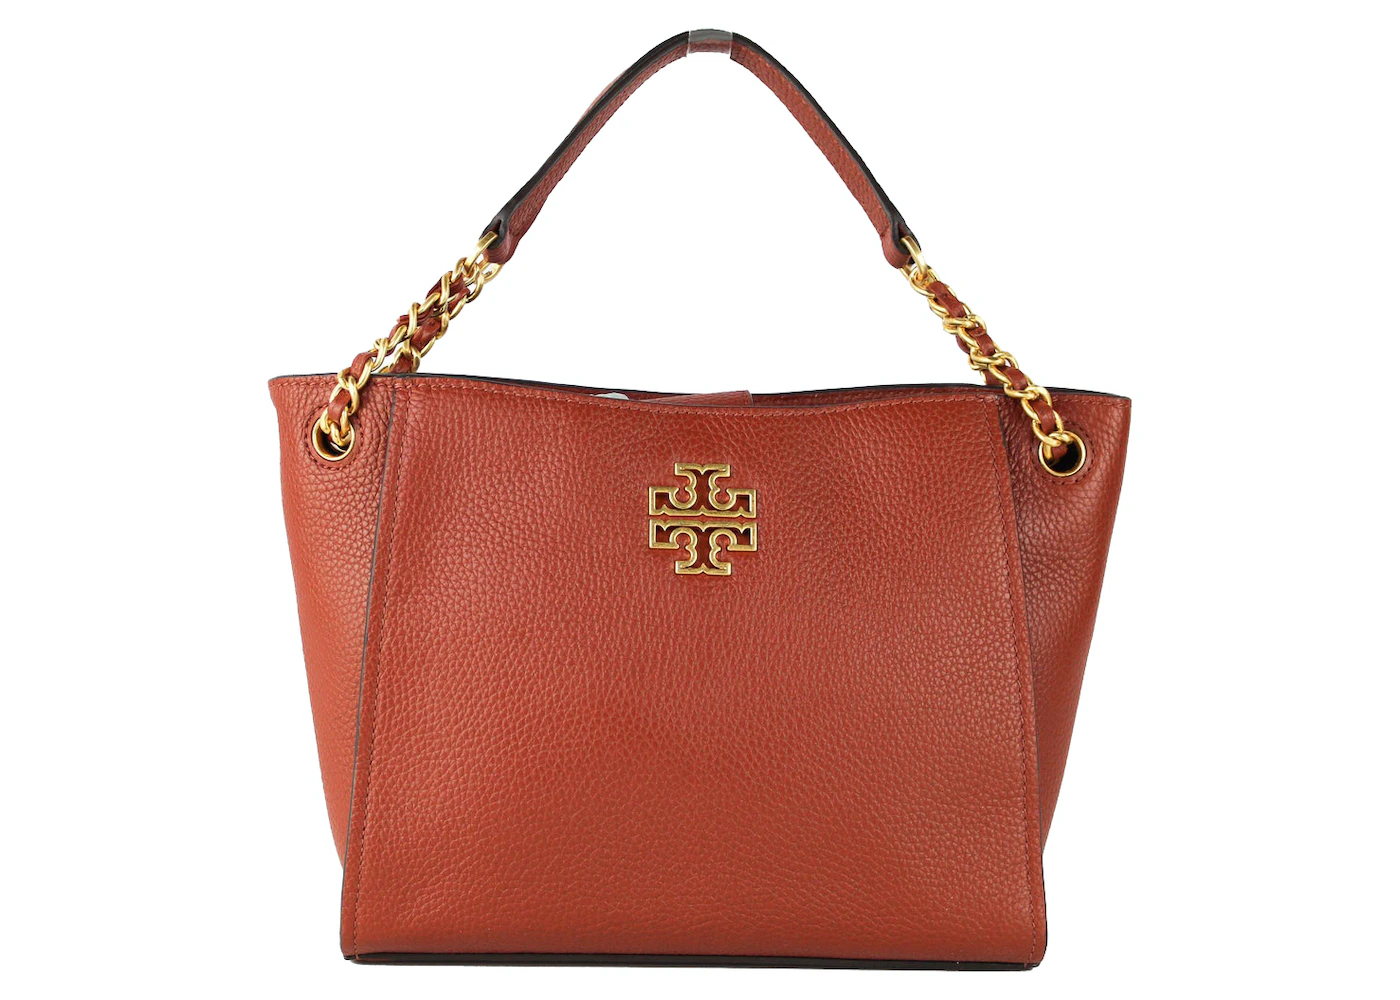 Tory Burch Emerson Small Top Zip Tote, Cardamon, One Size 